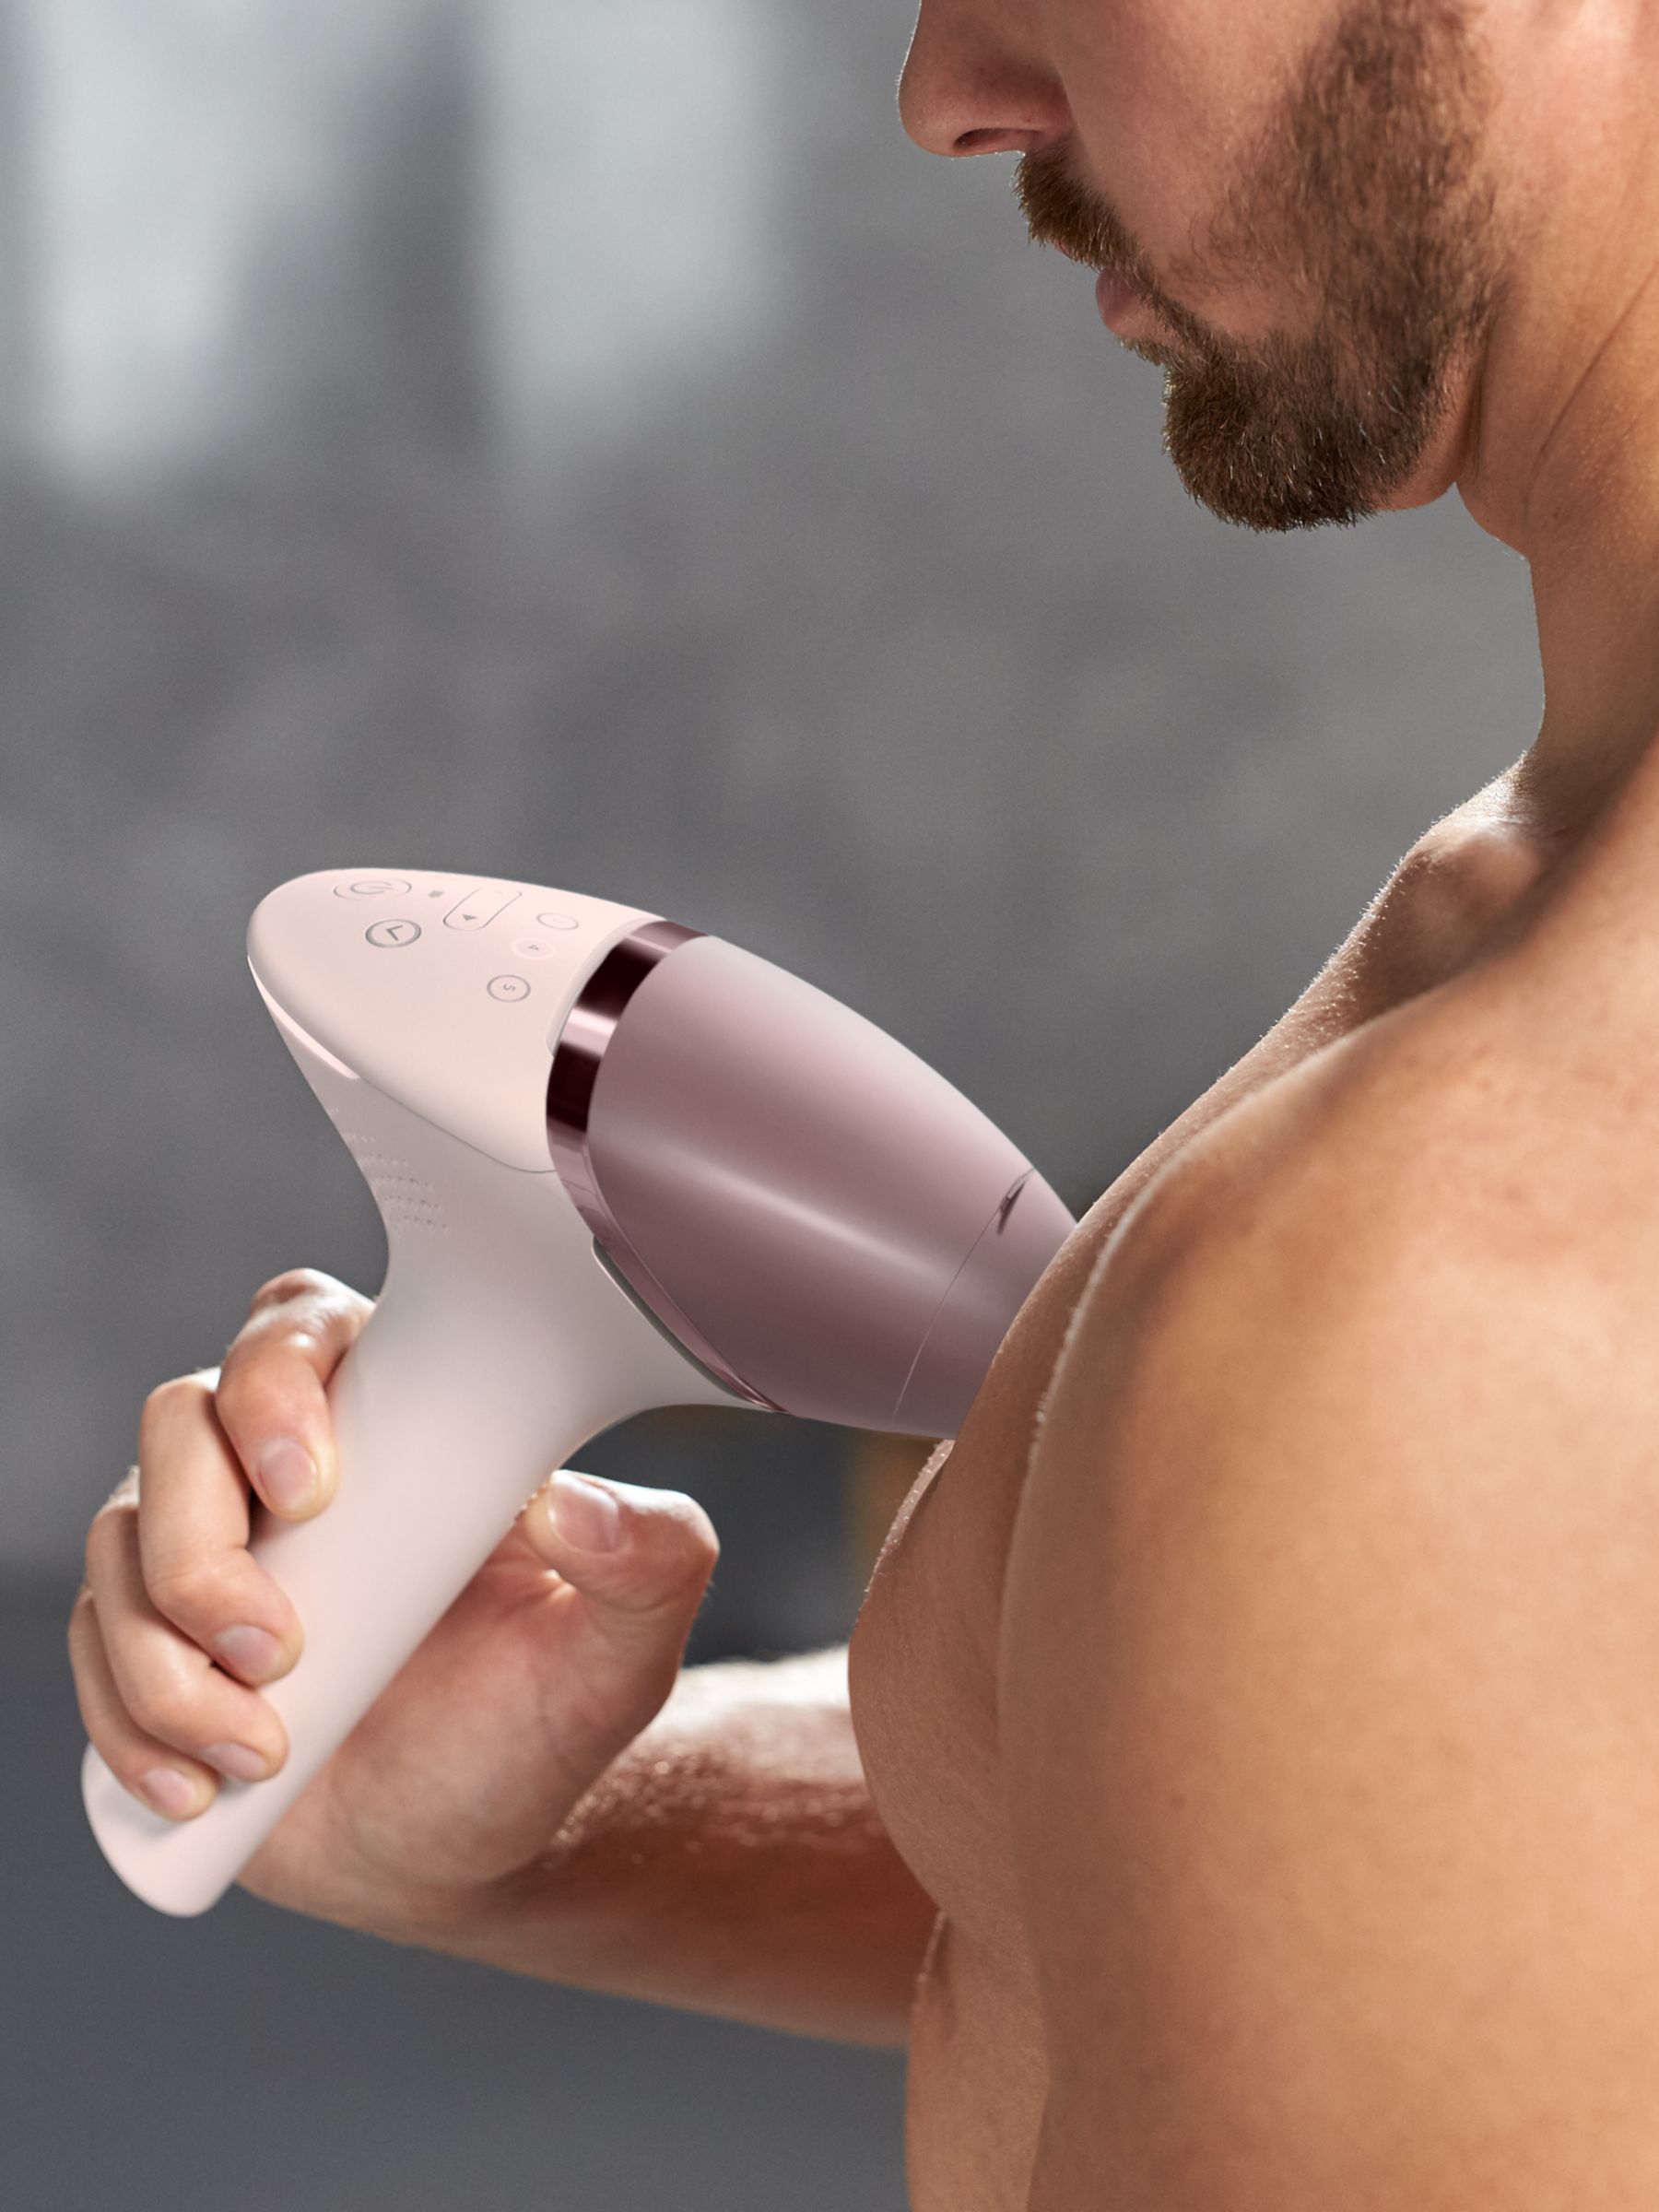 Philips Lumea IPL 9000 Series (Cordless with 3 Attachments for